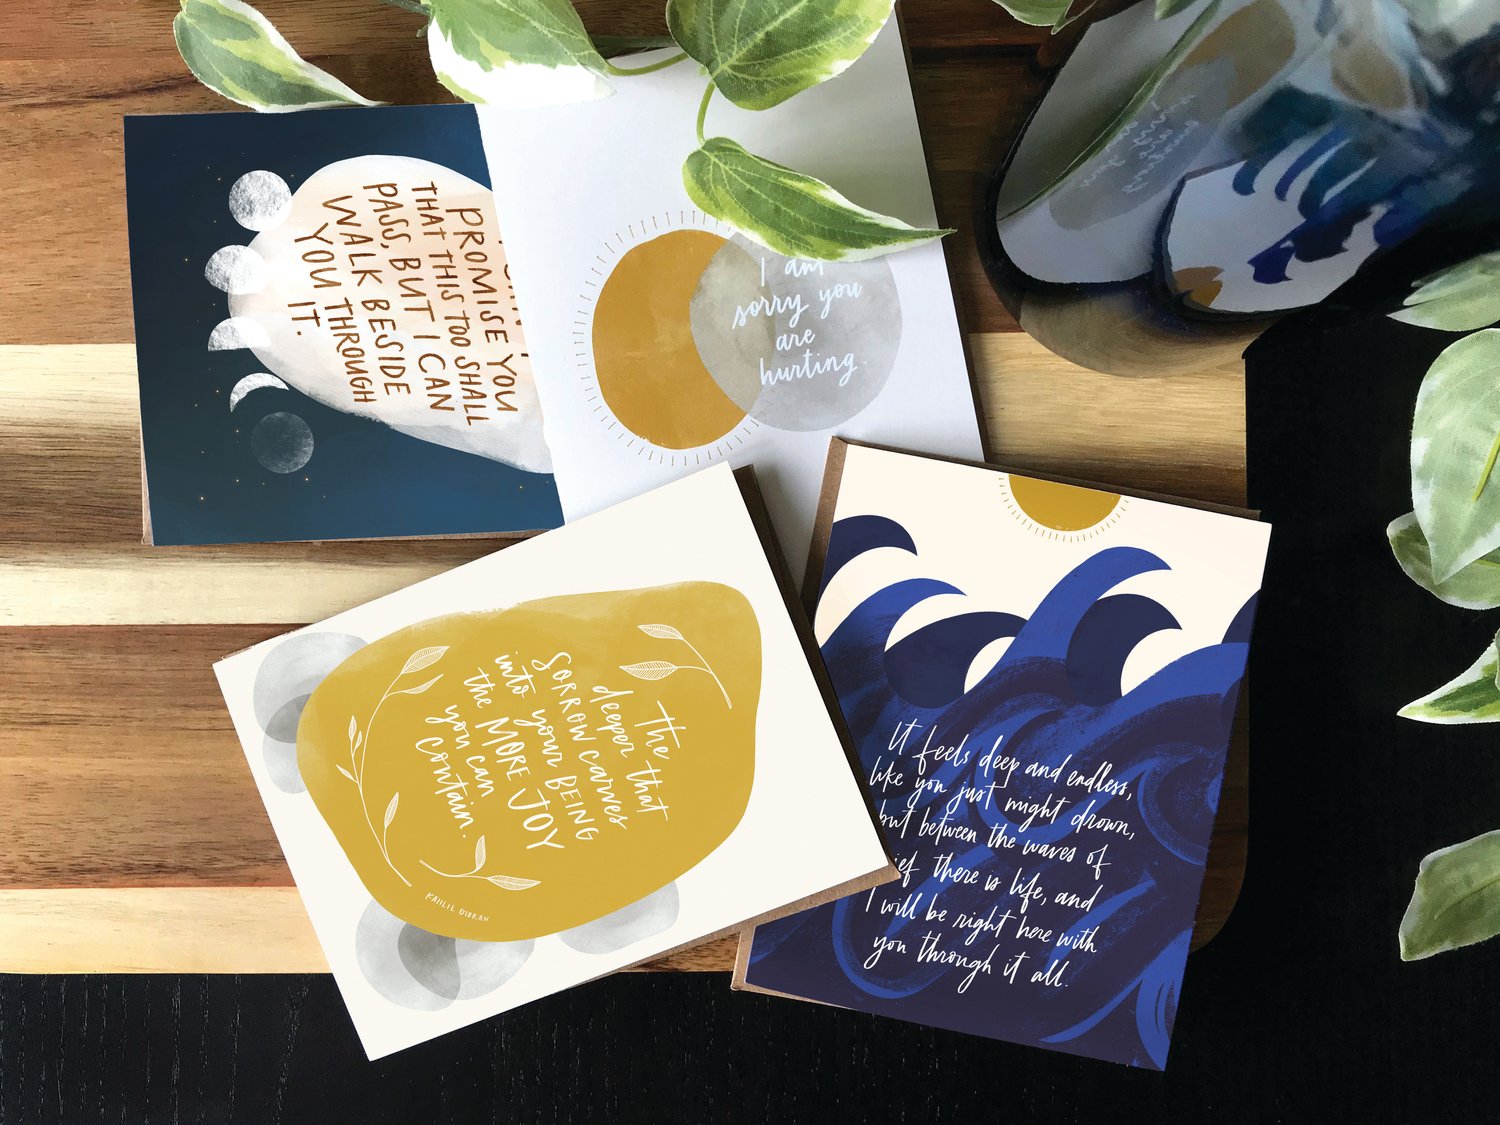 Unique and Meaningful Grief, Loss, and Sympathy Cards by Joymark Studio